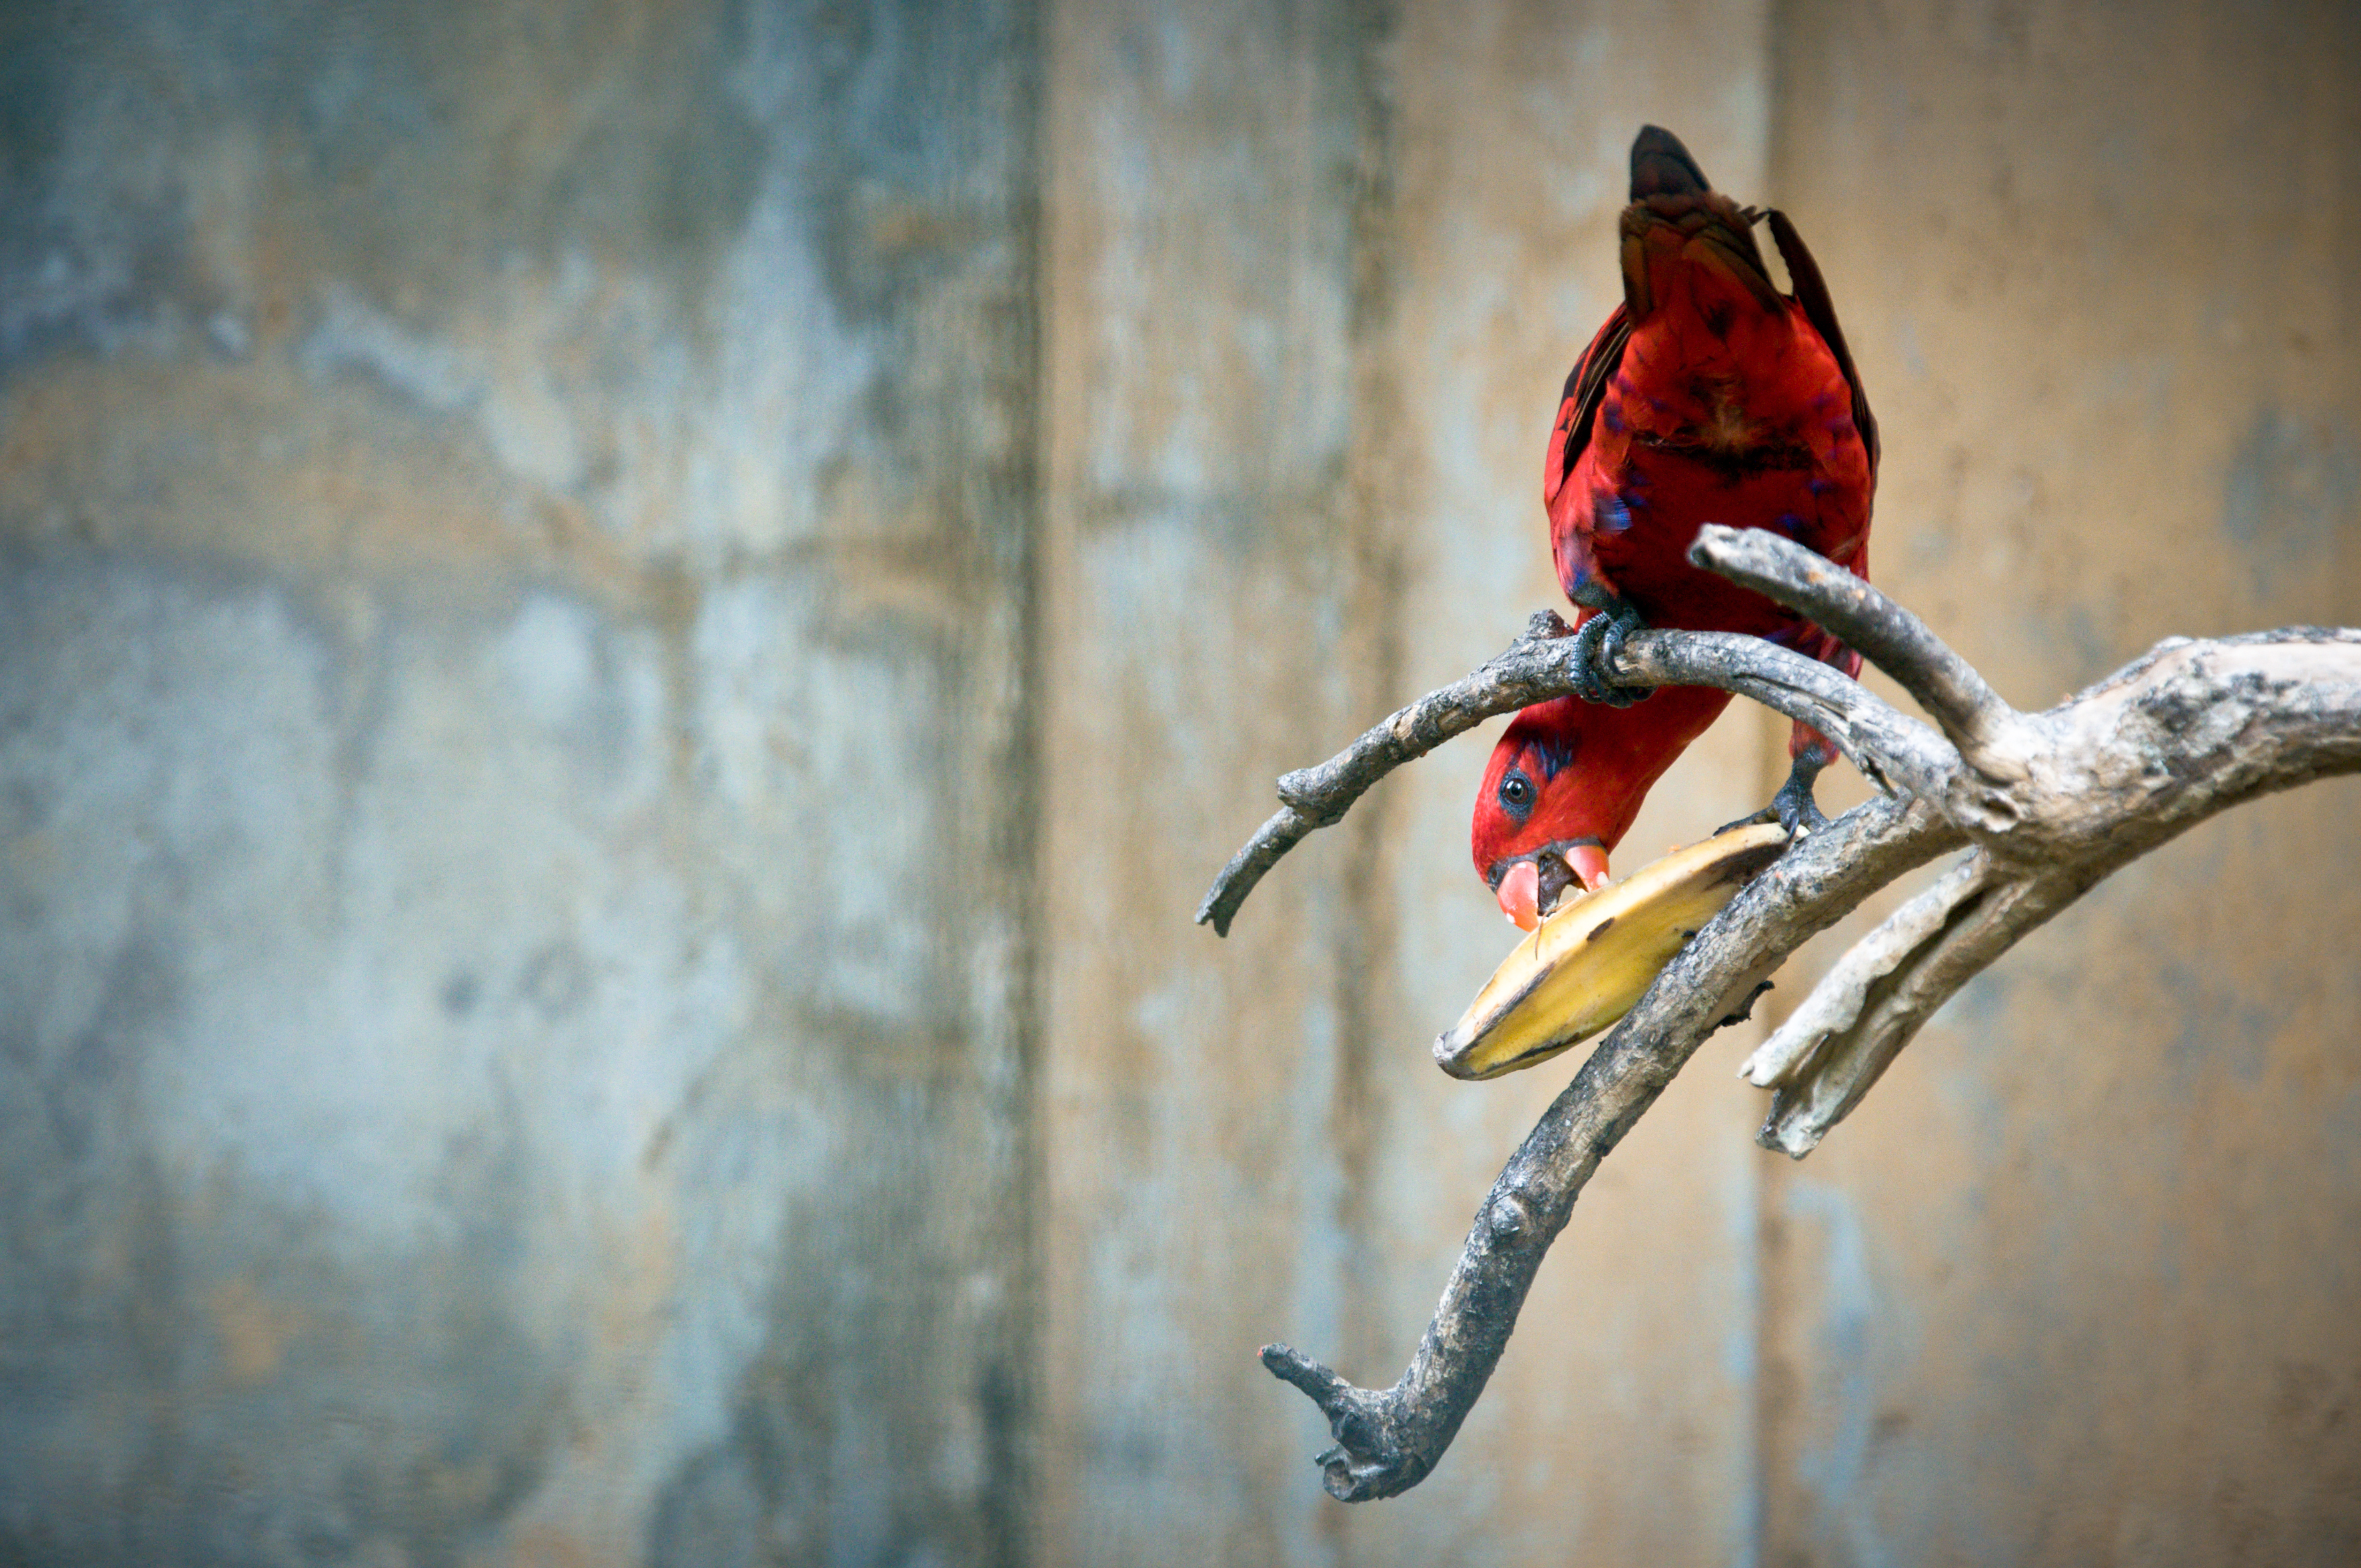 Red parrot, Amazon, Profile, Macao, Macaw, HQ Photo